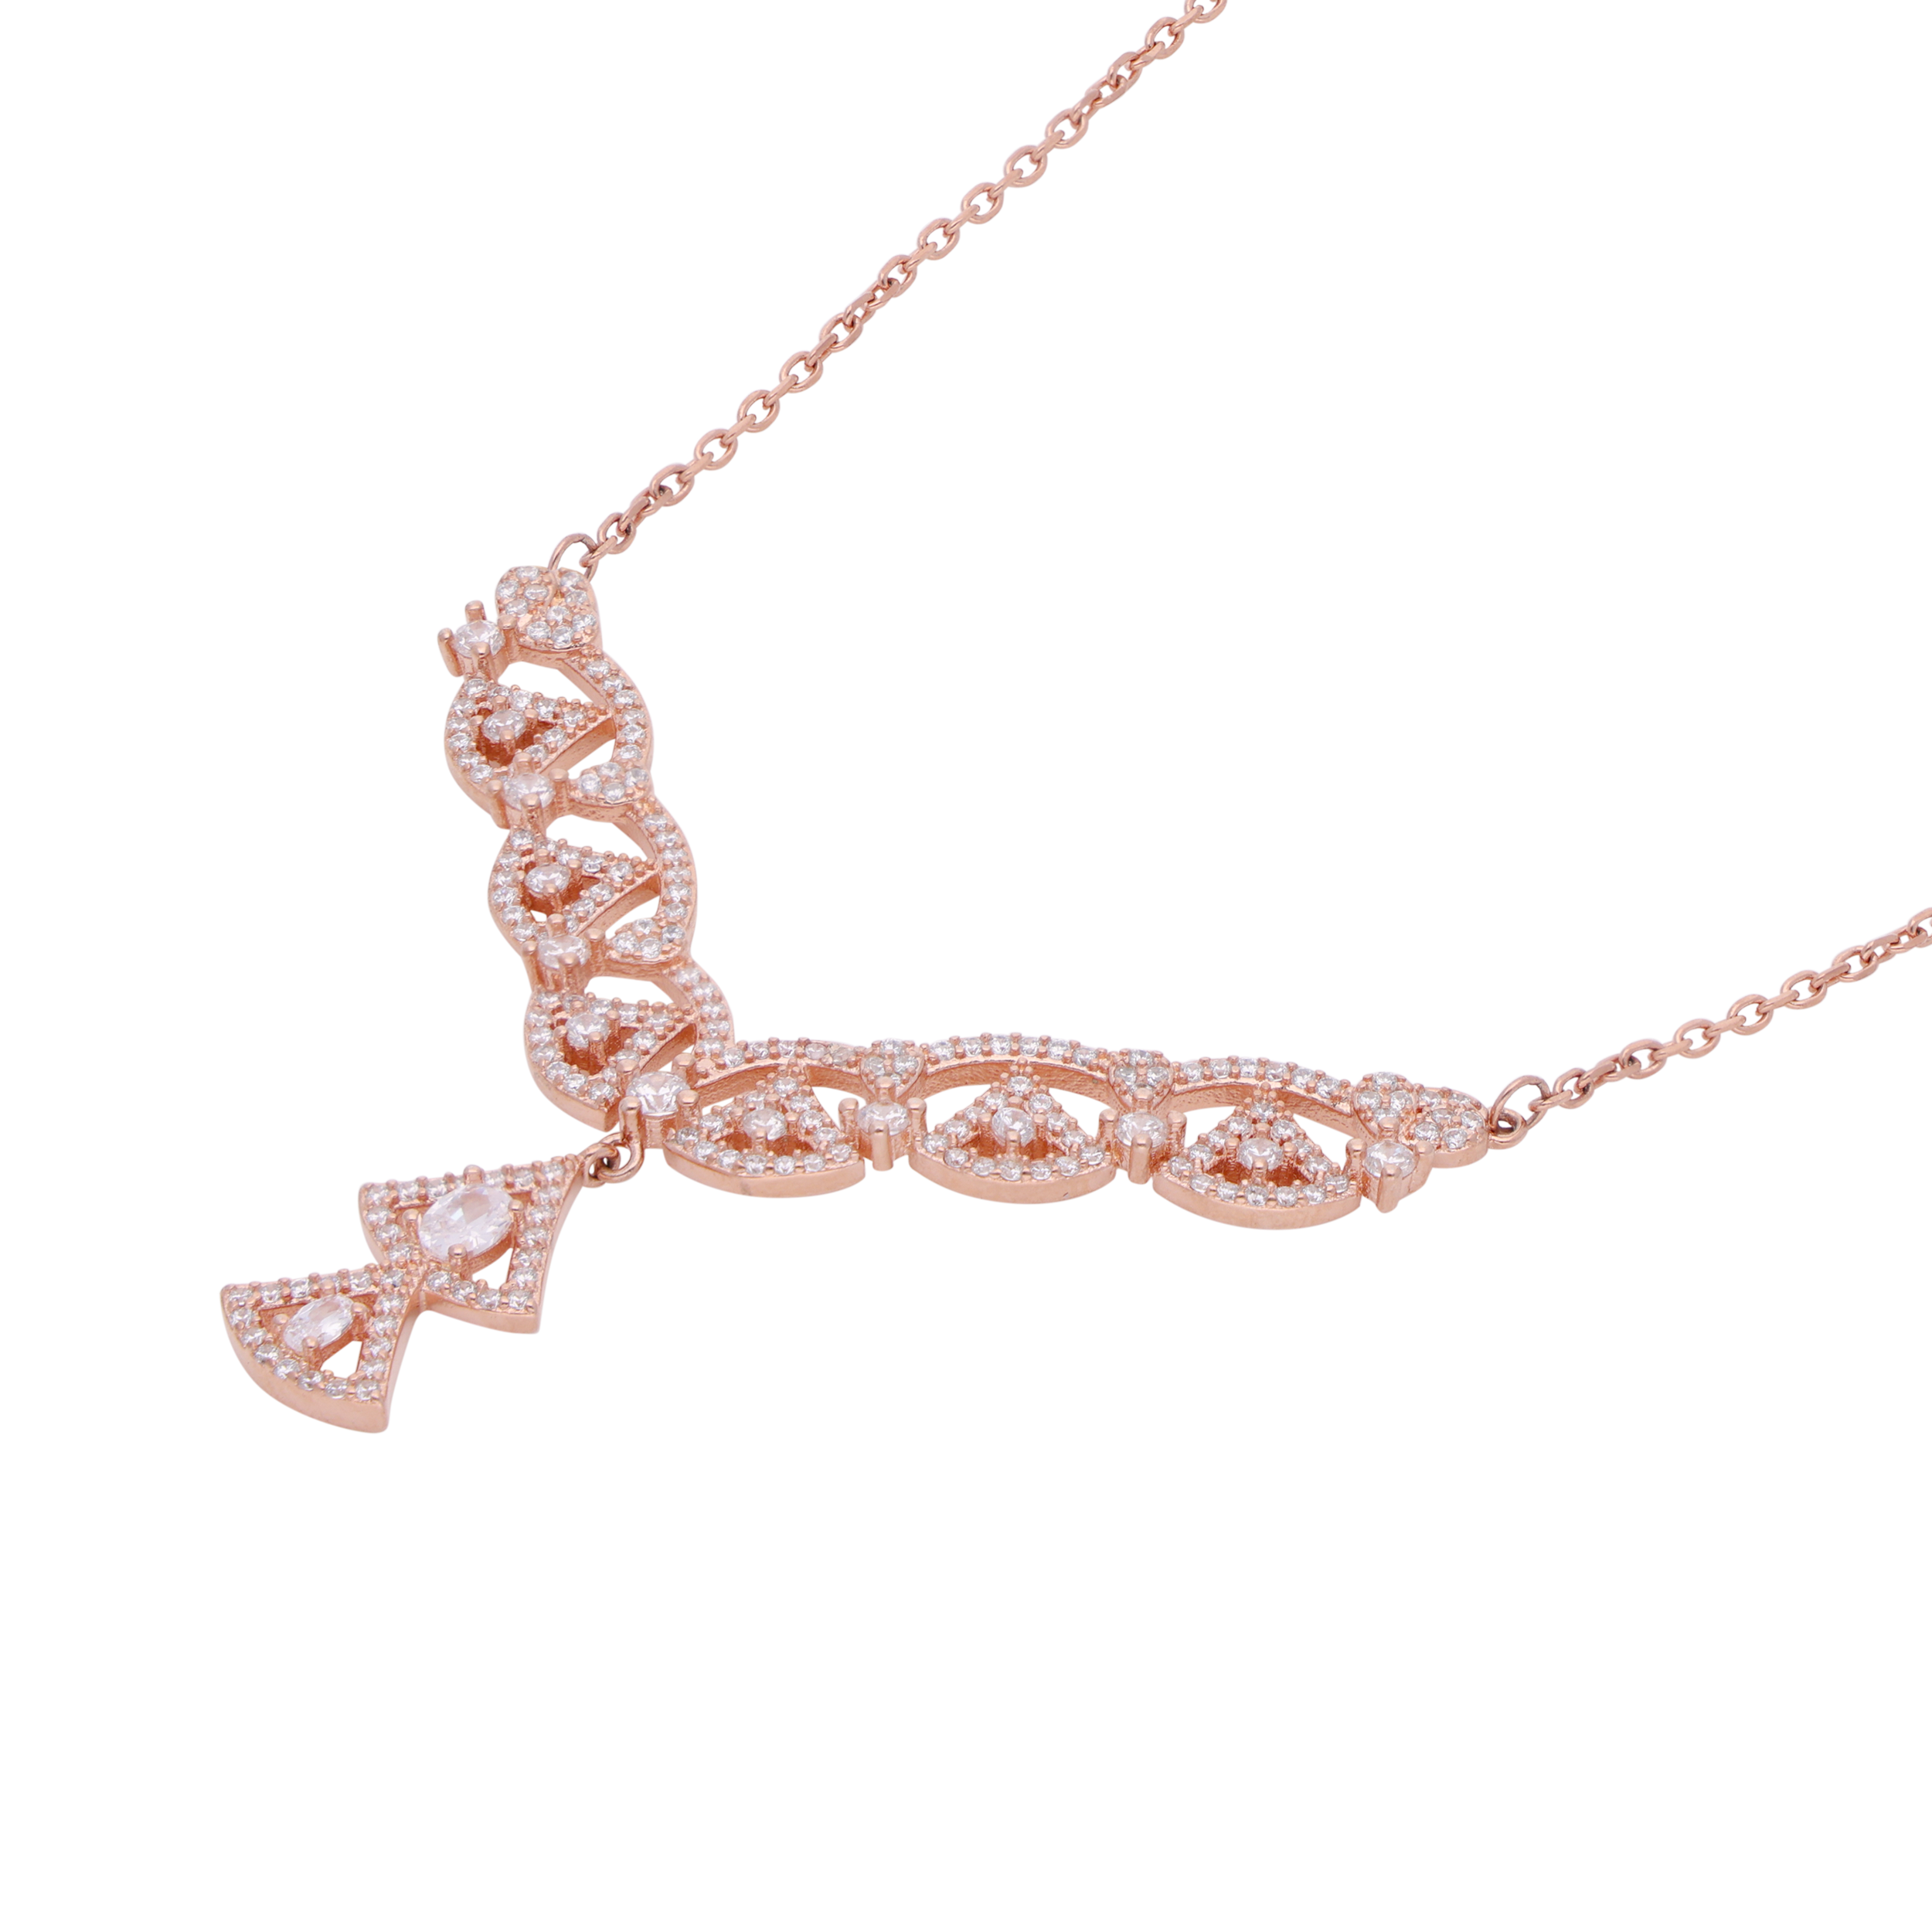 Radiant Rose: Sterling Silver Double Hood Chain Pendant | SKU : 0003113981, 0003114025